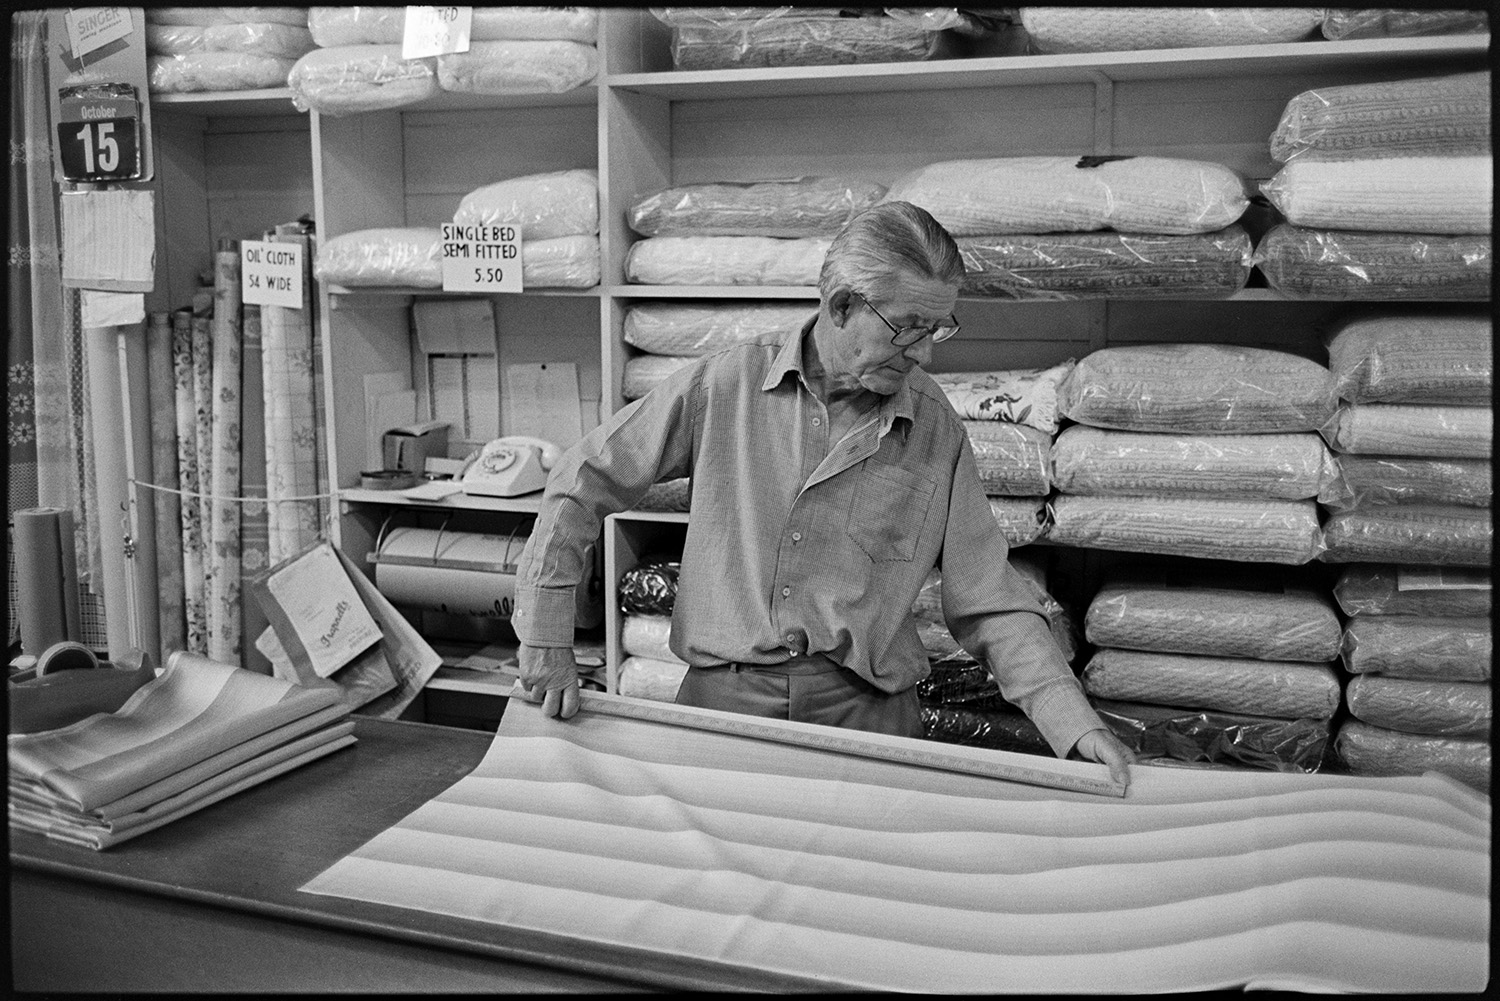 Proprietor of clothes shop, measuring cloth and talking to customer. 
[Mr Trapnell measuring material in his clothes shop, Trapnells, in Bideford High Street. Rolls of material and bedding can be seen on the shelves in the background.]